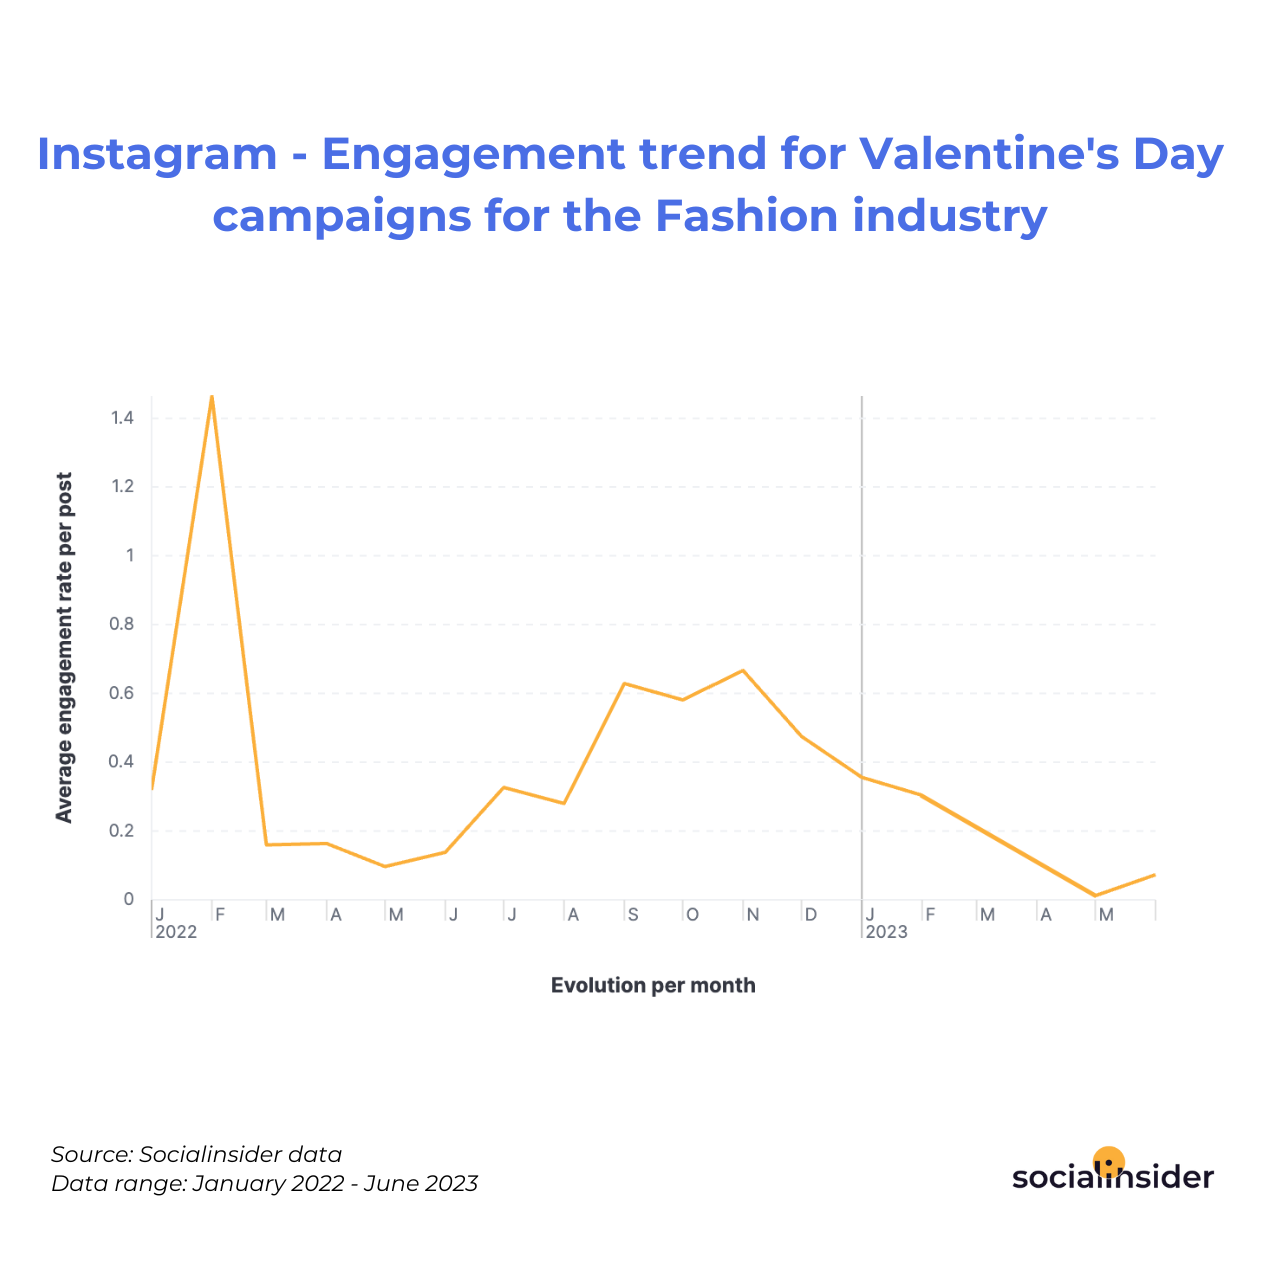 Instagram - Engagement trend for Valentine's Day campaigns for the Fashion industry